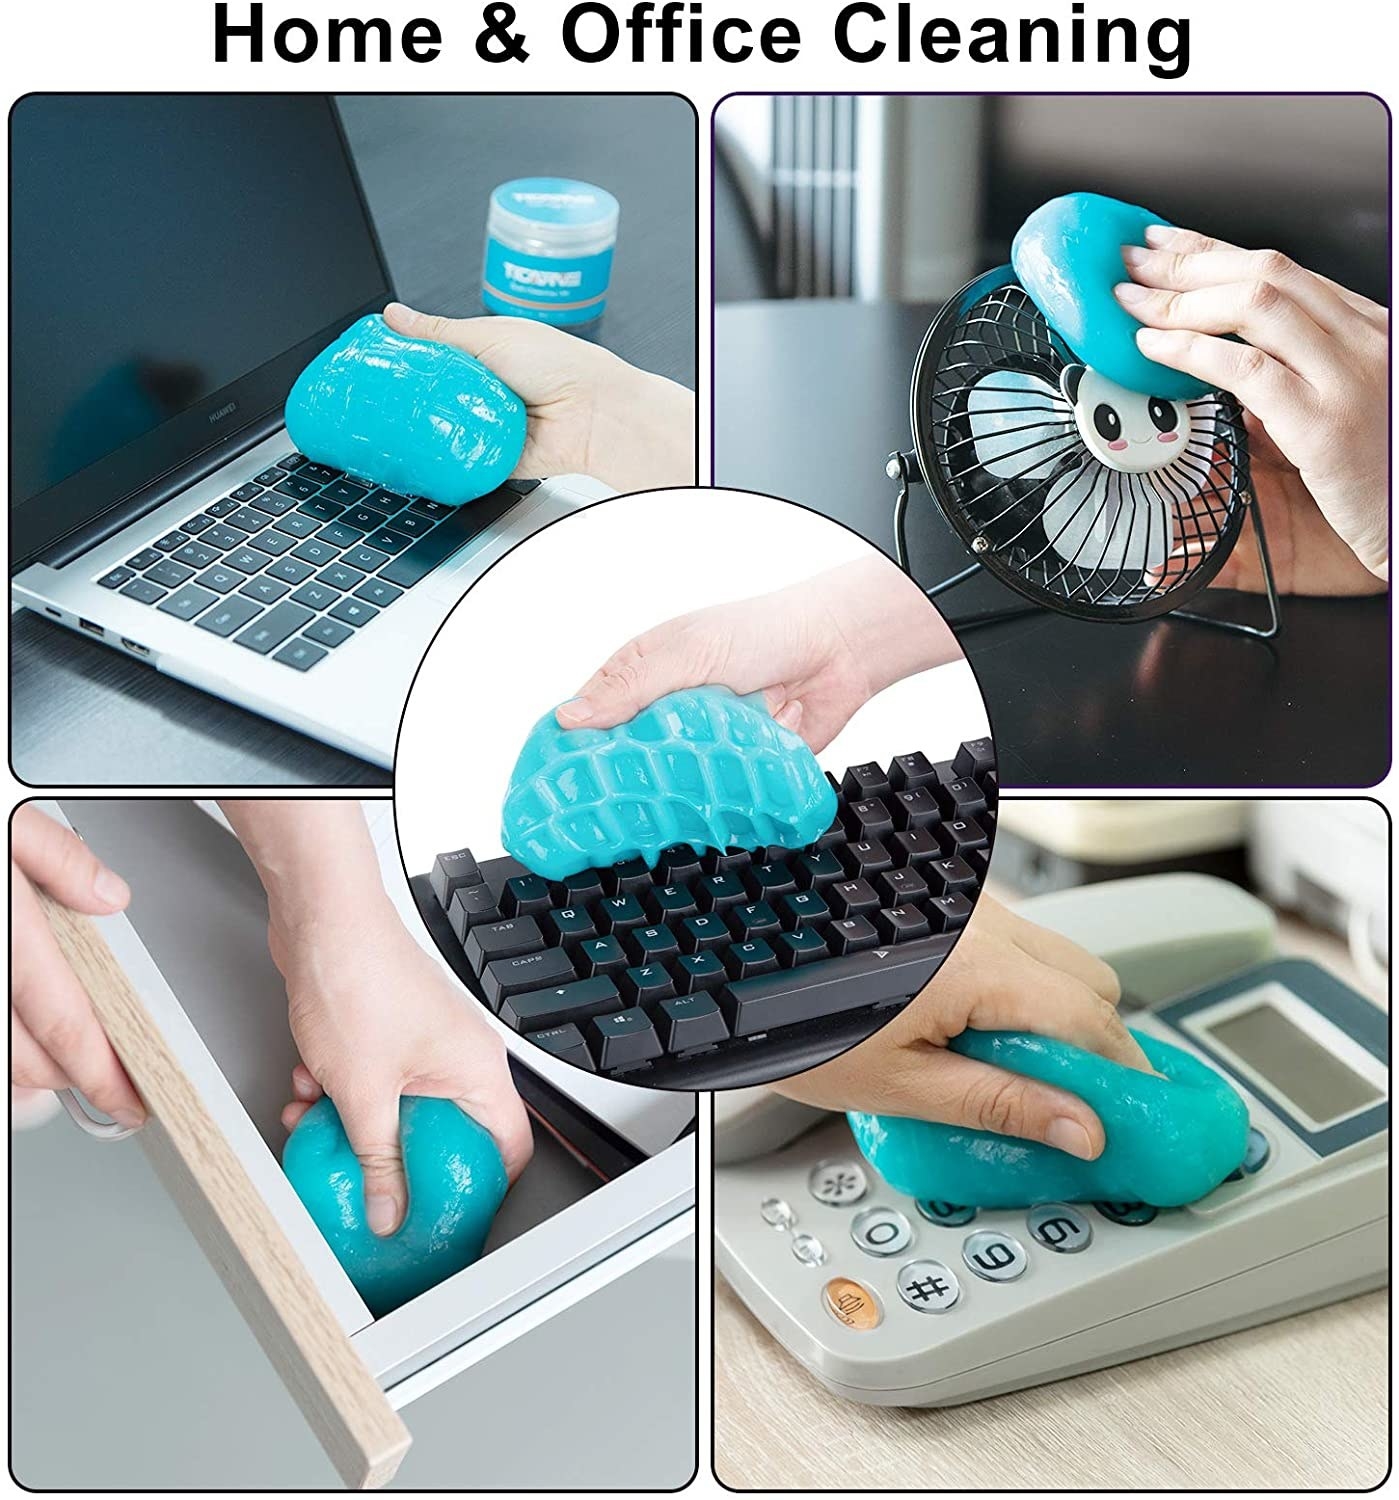 hand using the blue gel to clean a laptop keyboard, mini fan, desktop keyboard, number pad on a landline phone, and a desk drawer